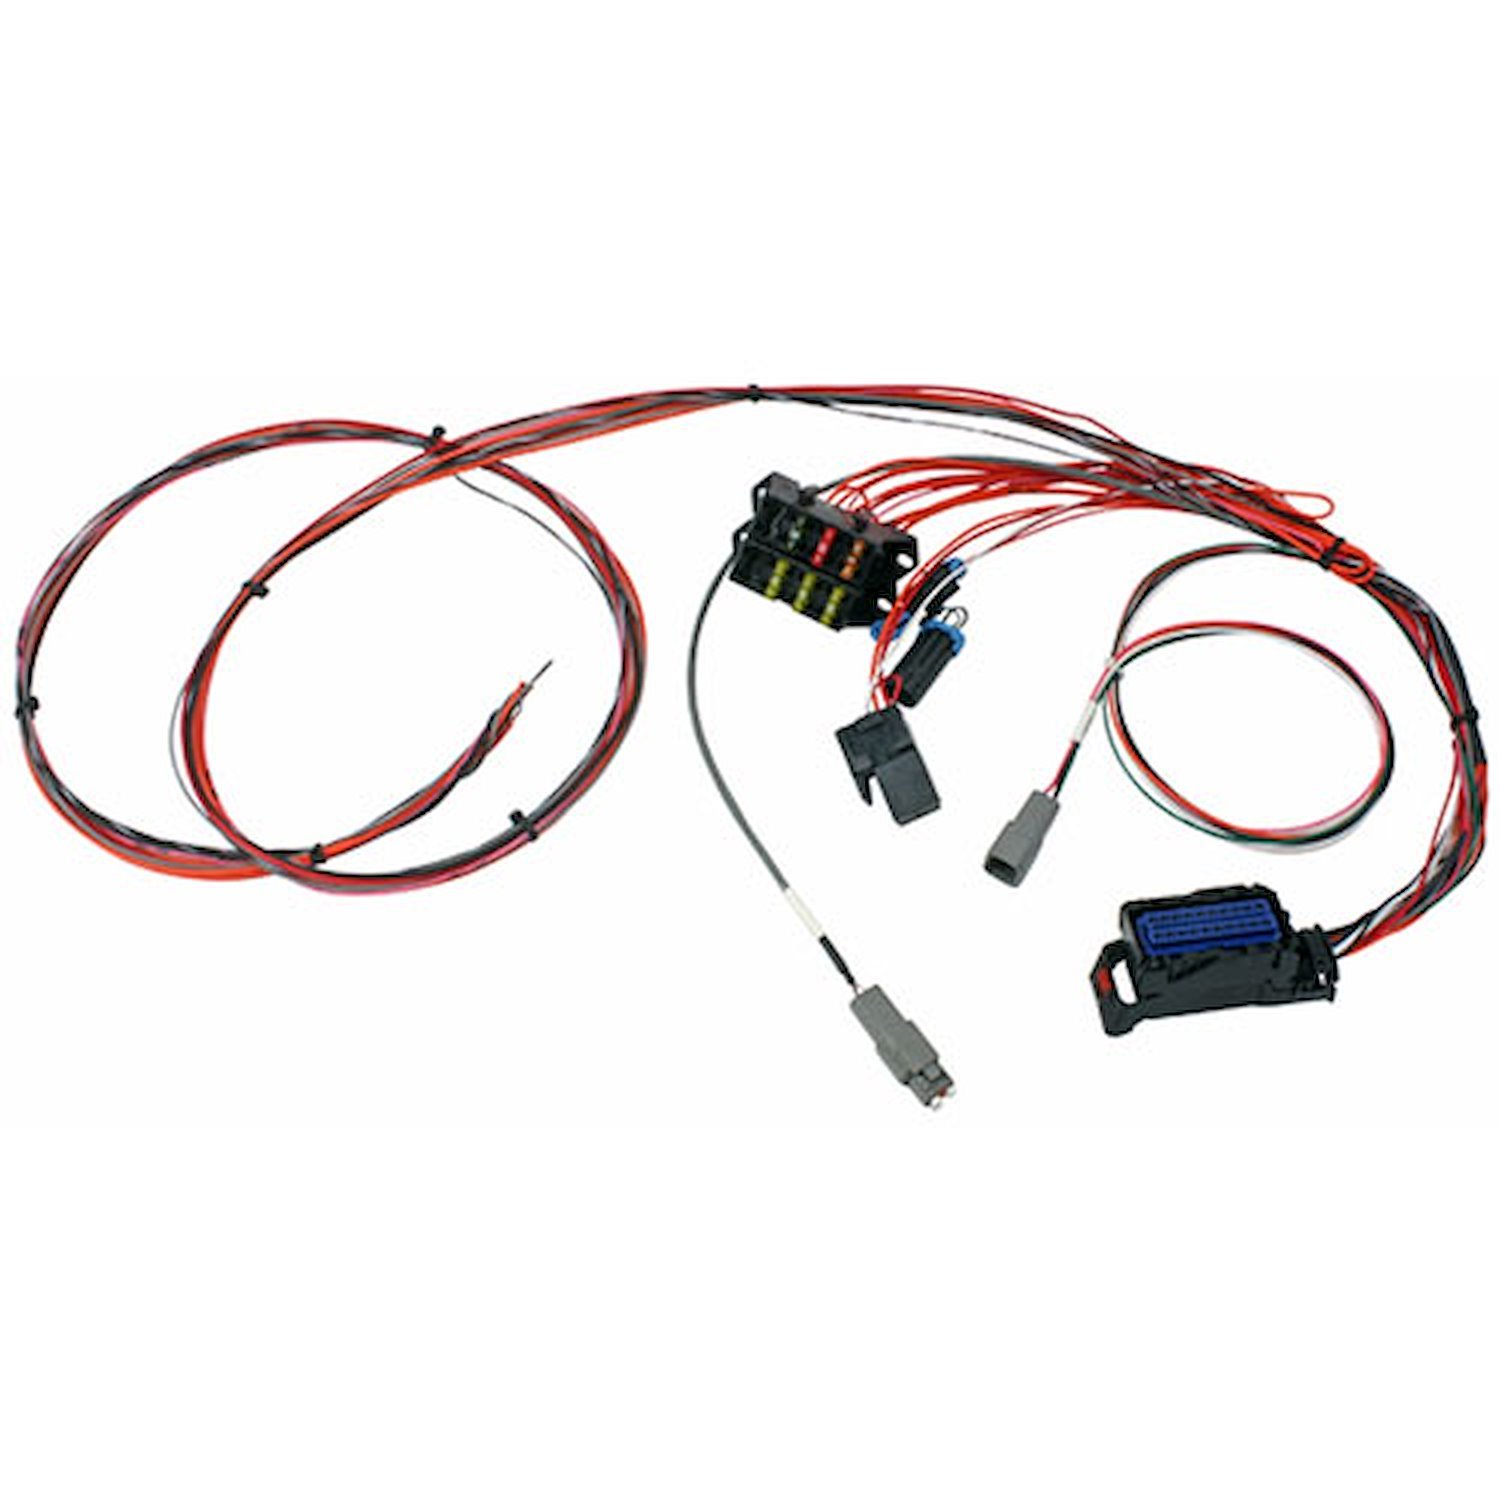 Infinity Series 5 Universal Mini-Harness With Pre-Wired Power, Grounds, Power Relay, Fuse Box, Single Wideband And AEMnet